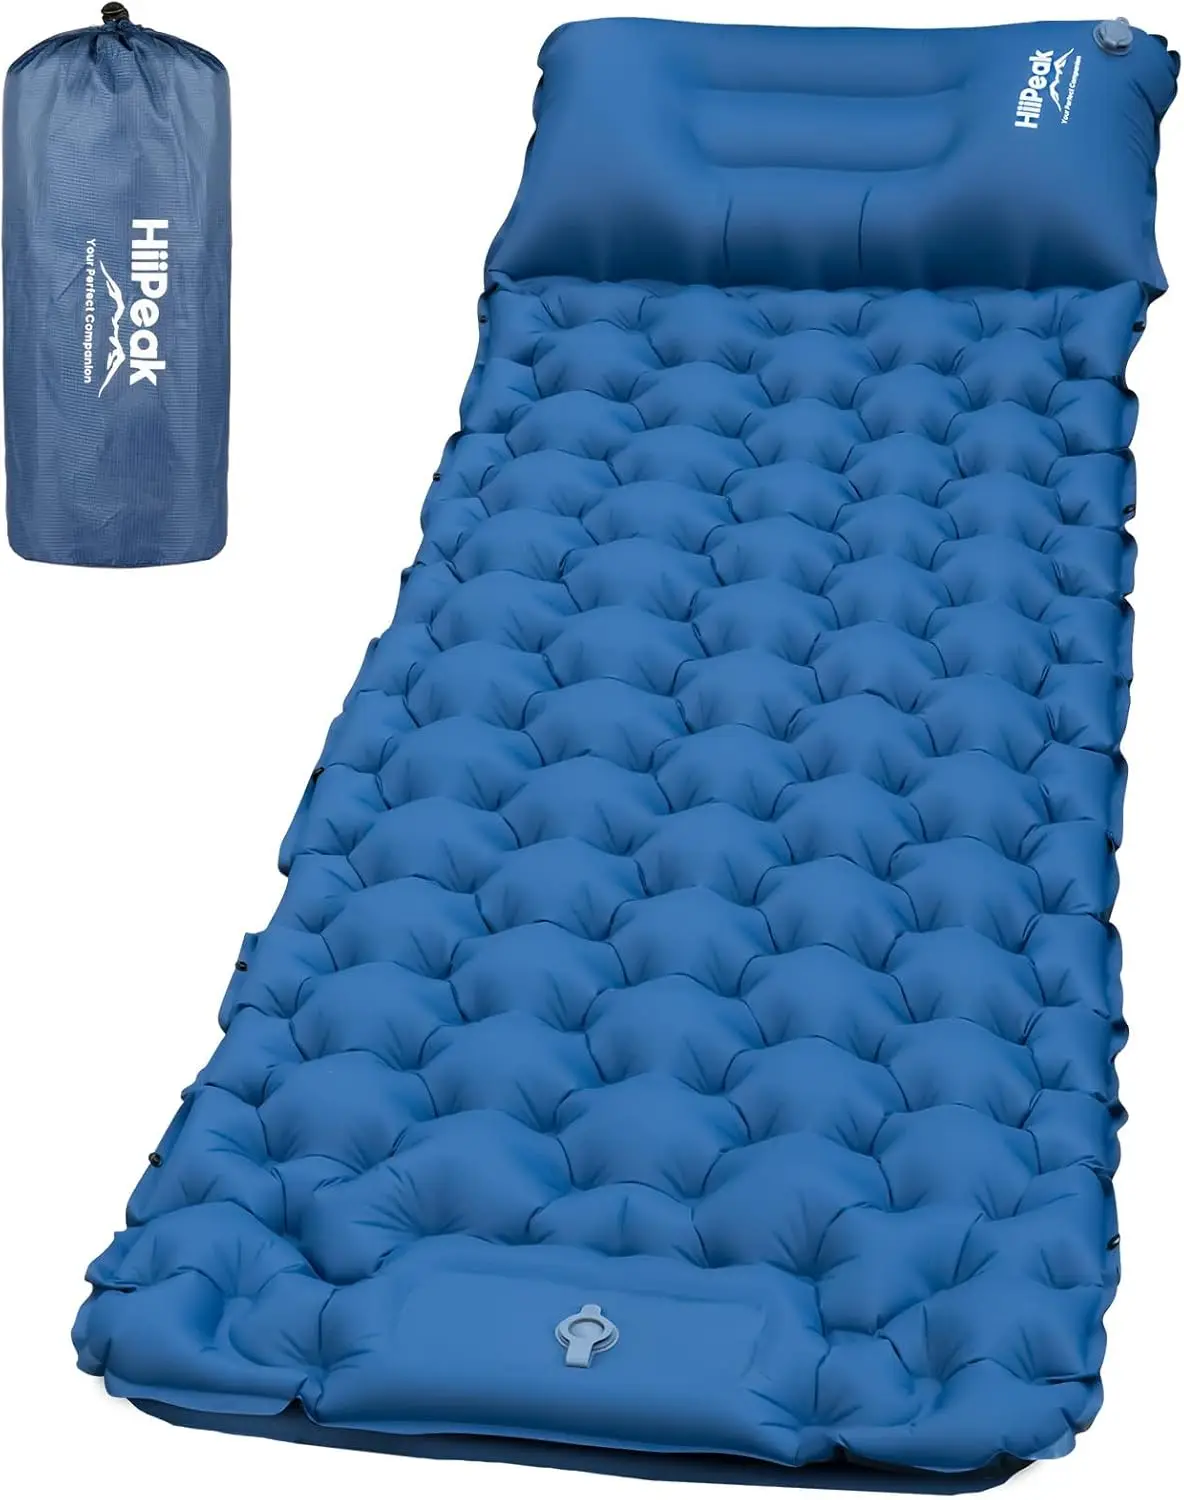 

HiiPeak Sleeping Pad for Camping- Ultralight Inflatable Sleeping Mat with Built-in Foot Pump & Pillow, Upgraded Compact Camping